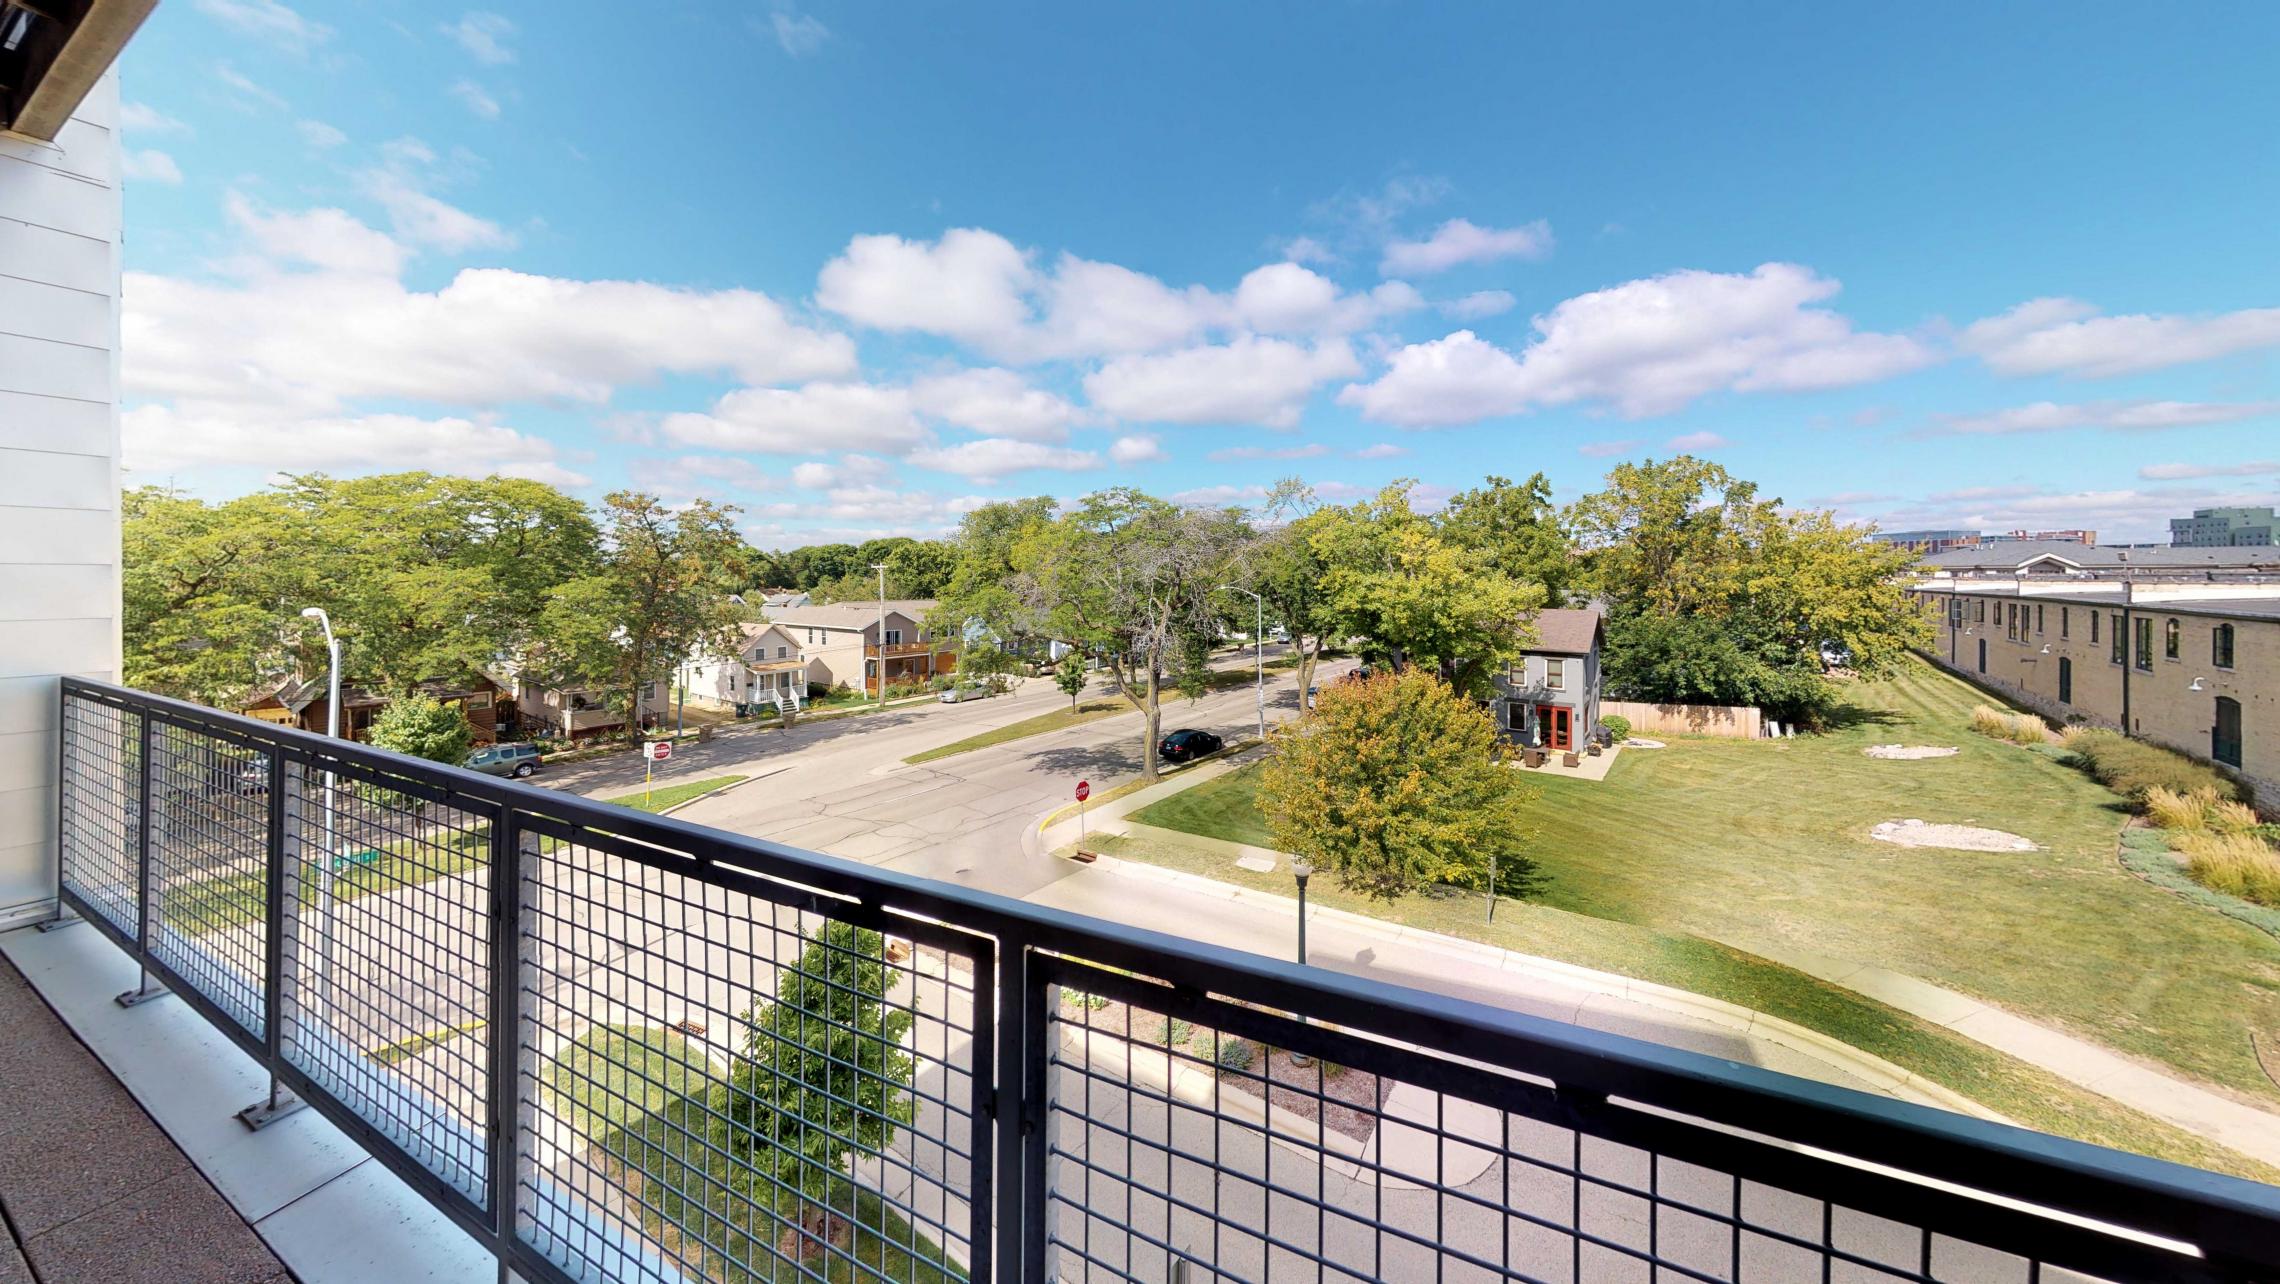 SEVEN27-Apartment-312-one-bedroom-modern-downtown-Madison-city-view-upscale.jpg